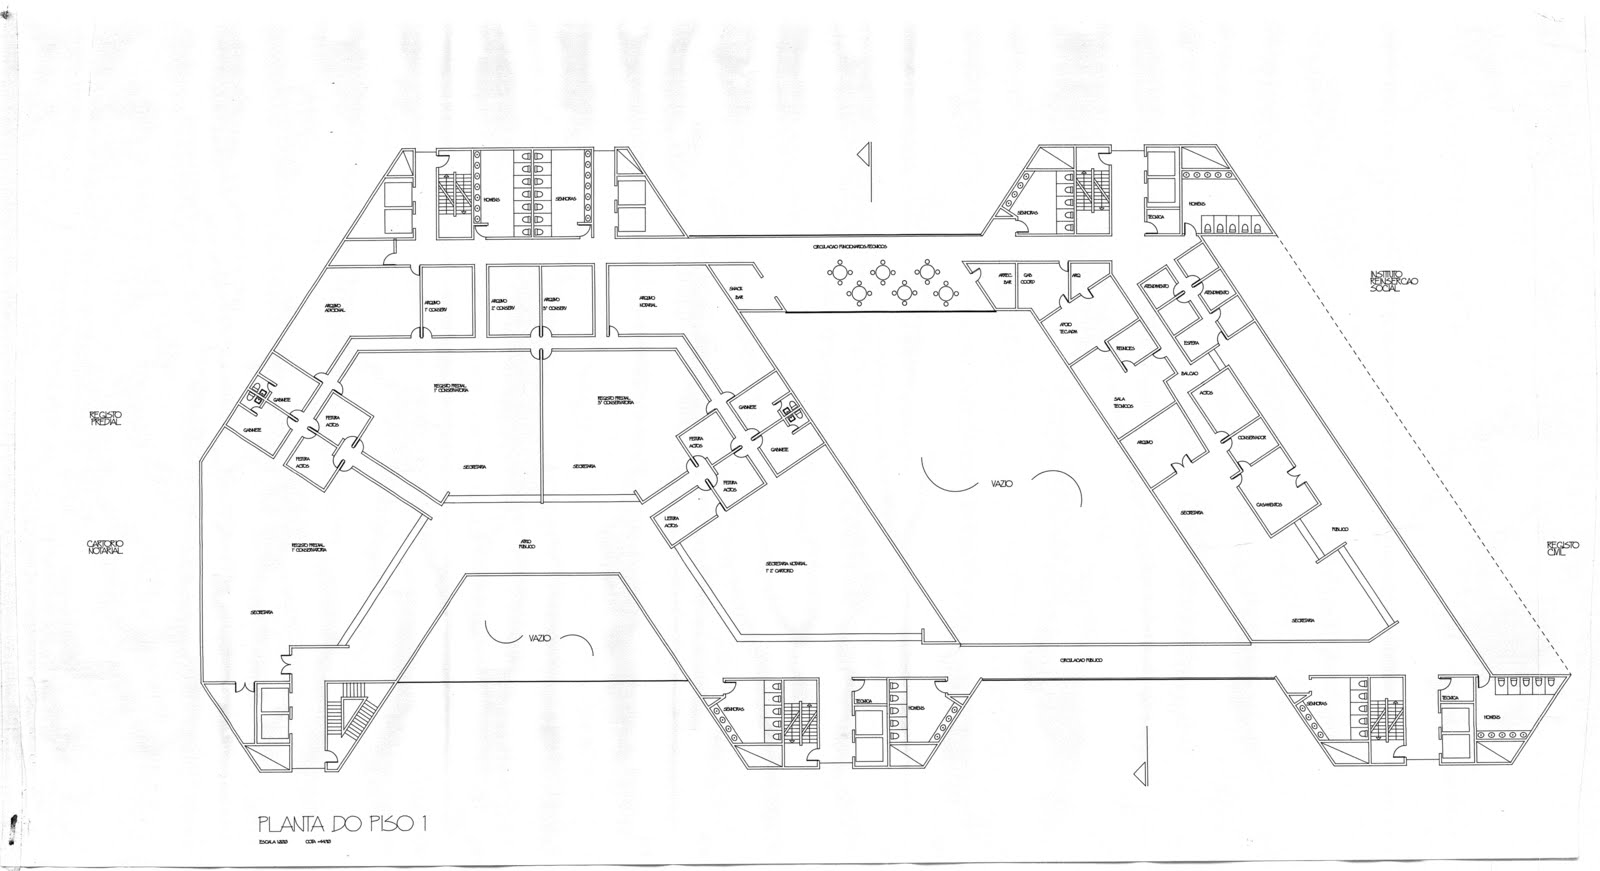 PJC - Preliminary Schematic Floor Plan lay-out